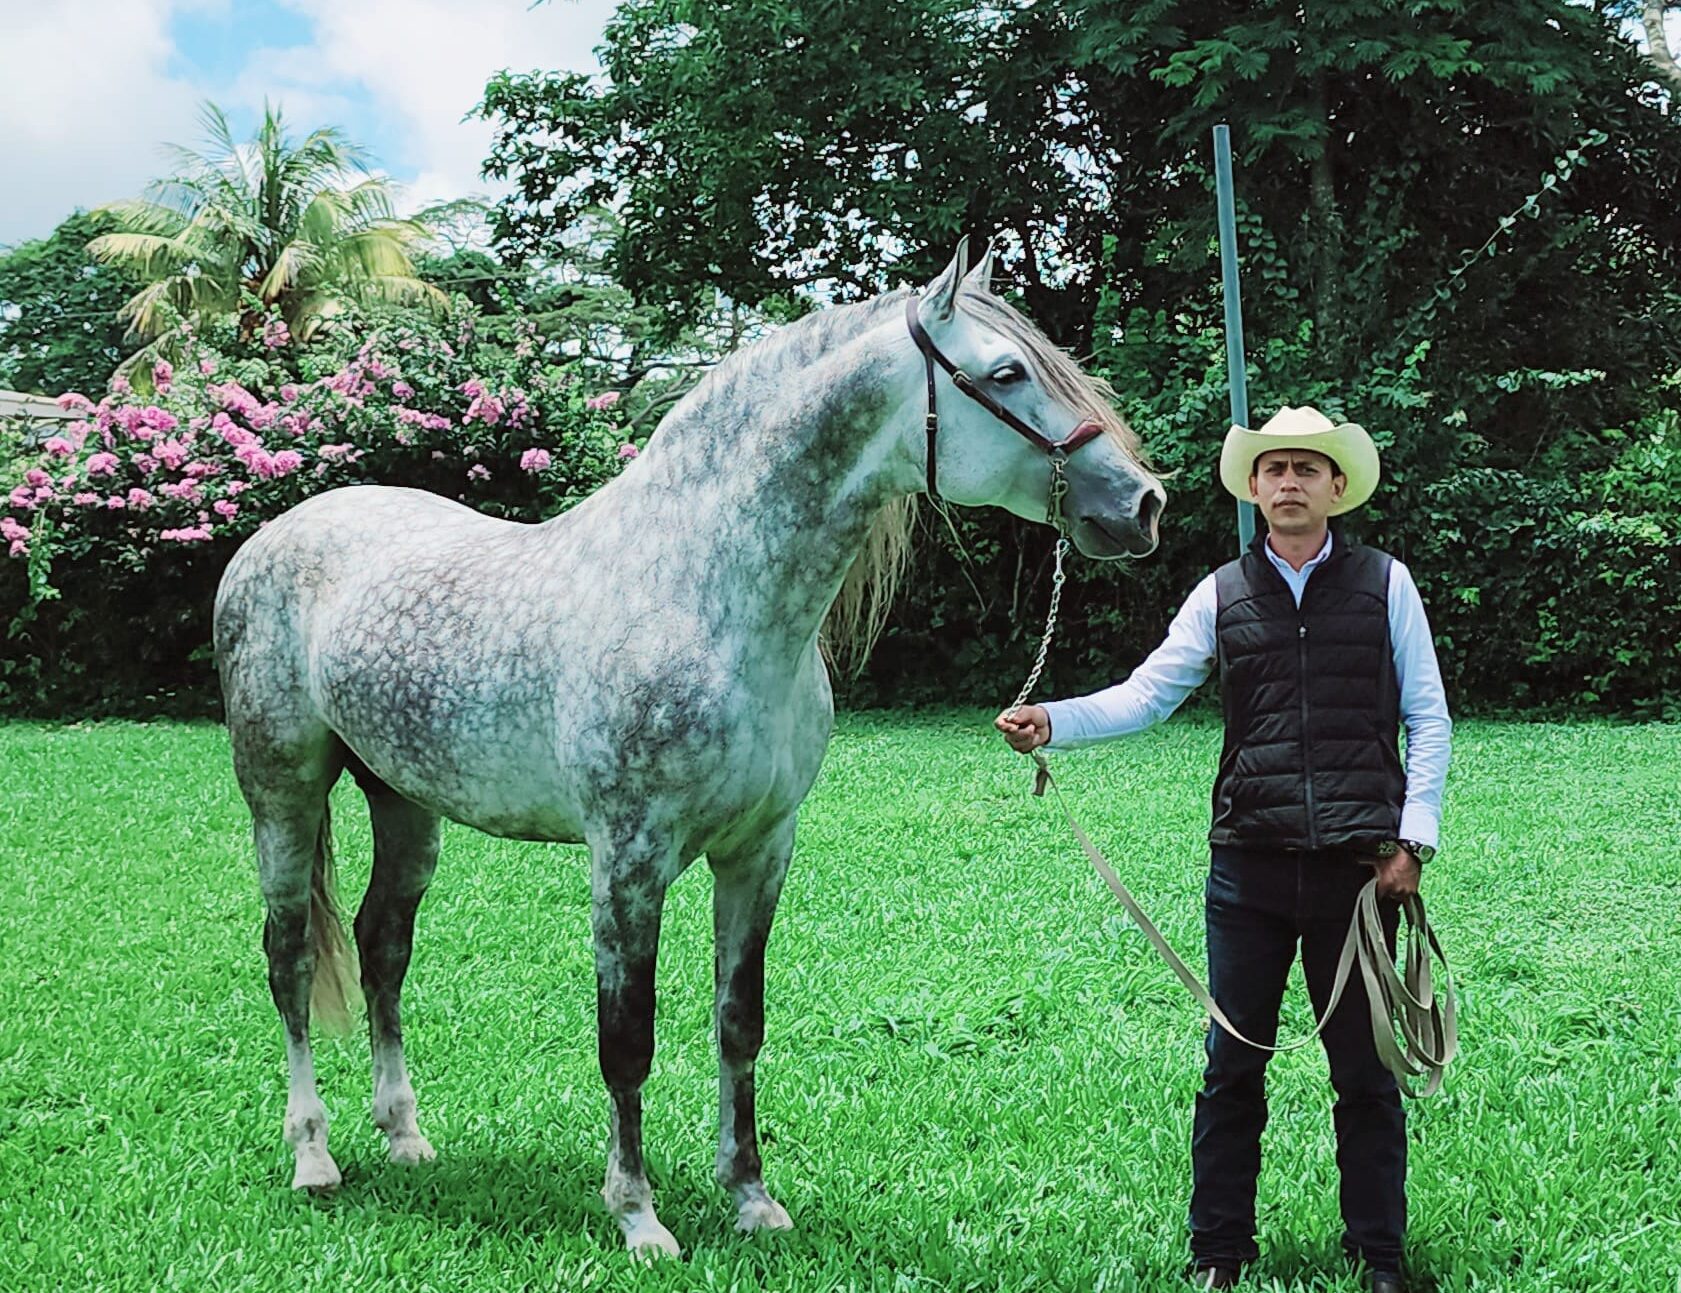 The sociologist who breeds, trains and rides horses in Camoapa